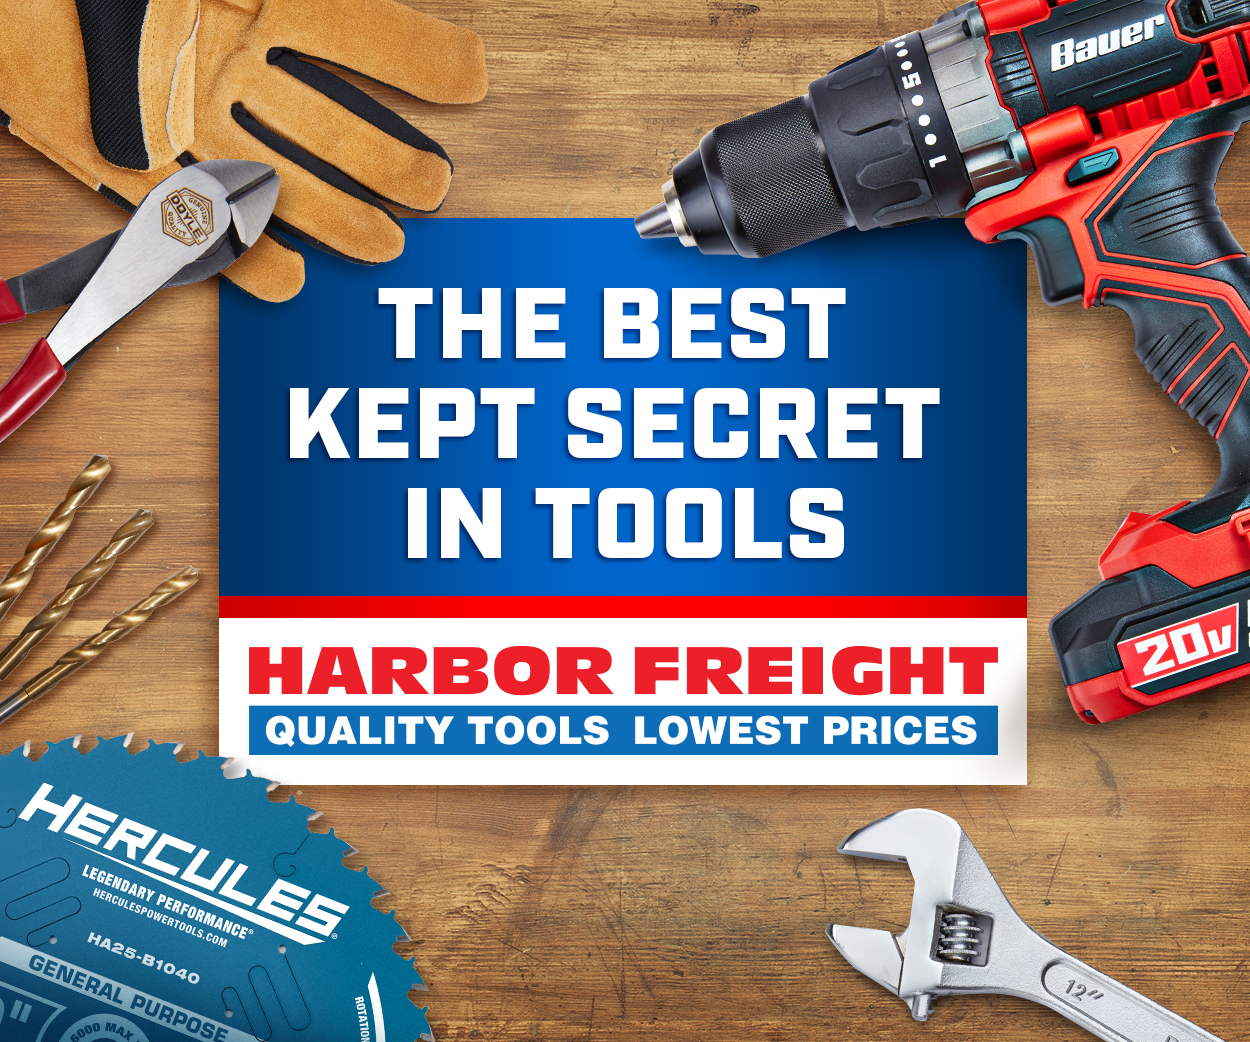 What Is Harbor Freight? – Harbor Freight Coupons